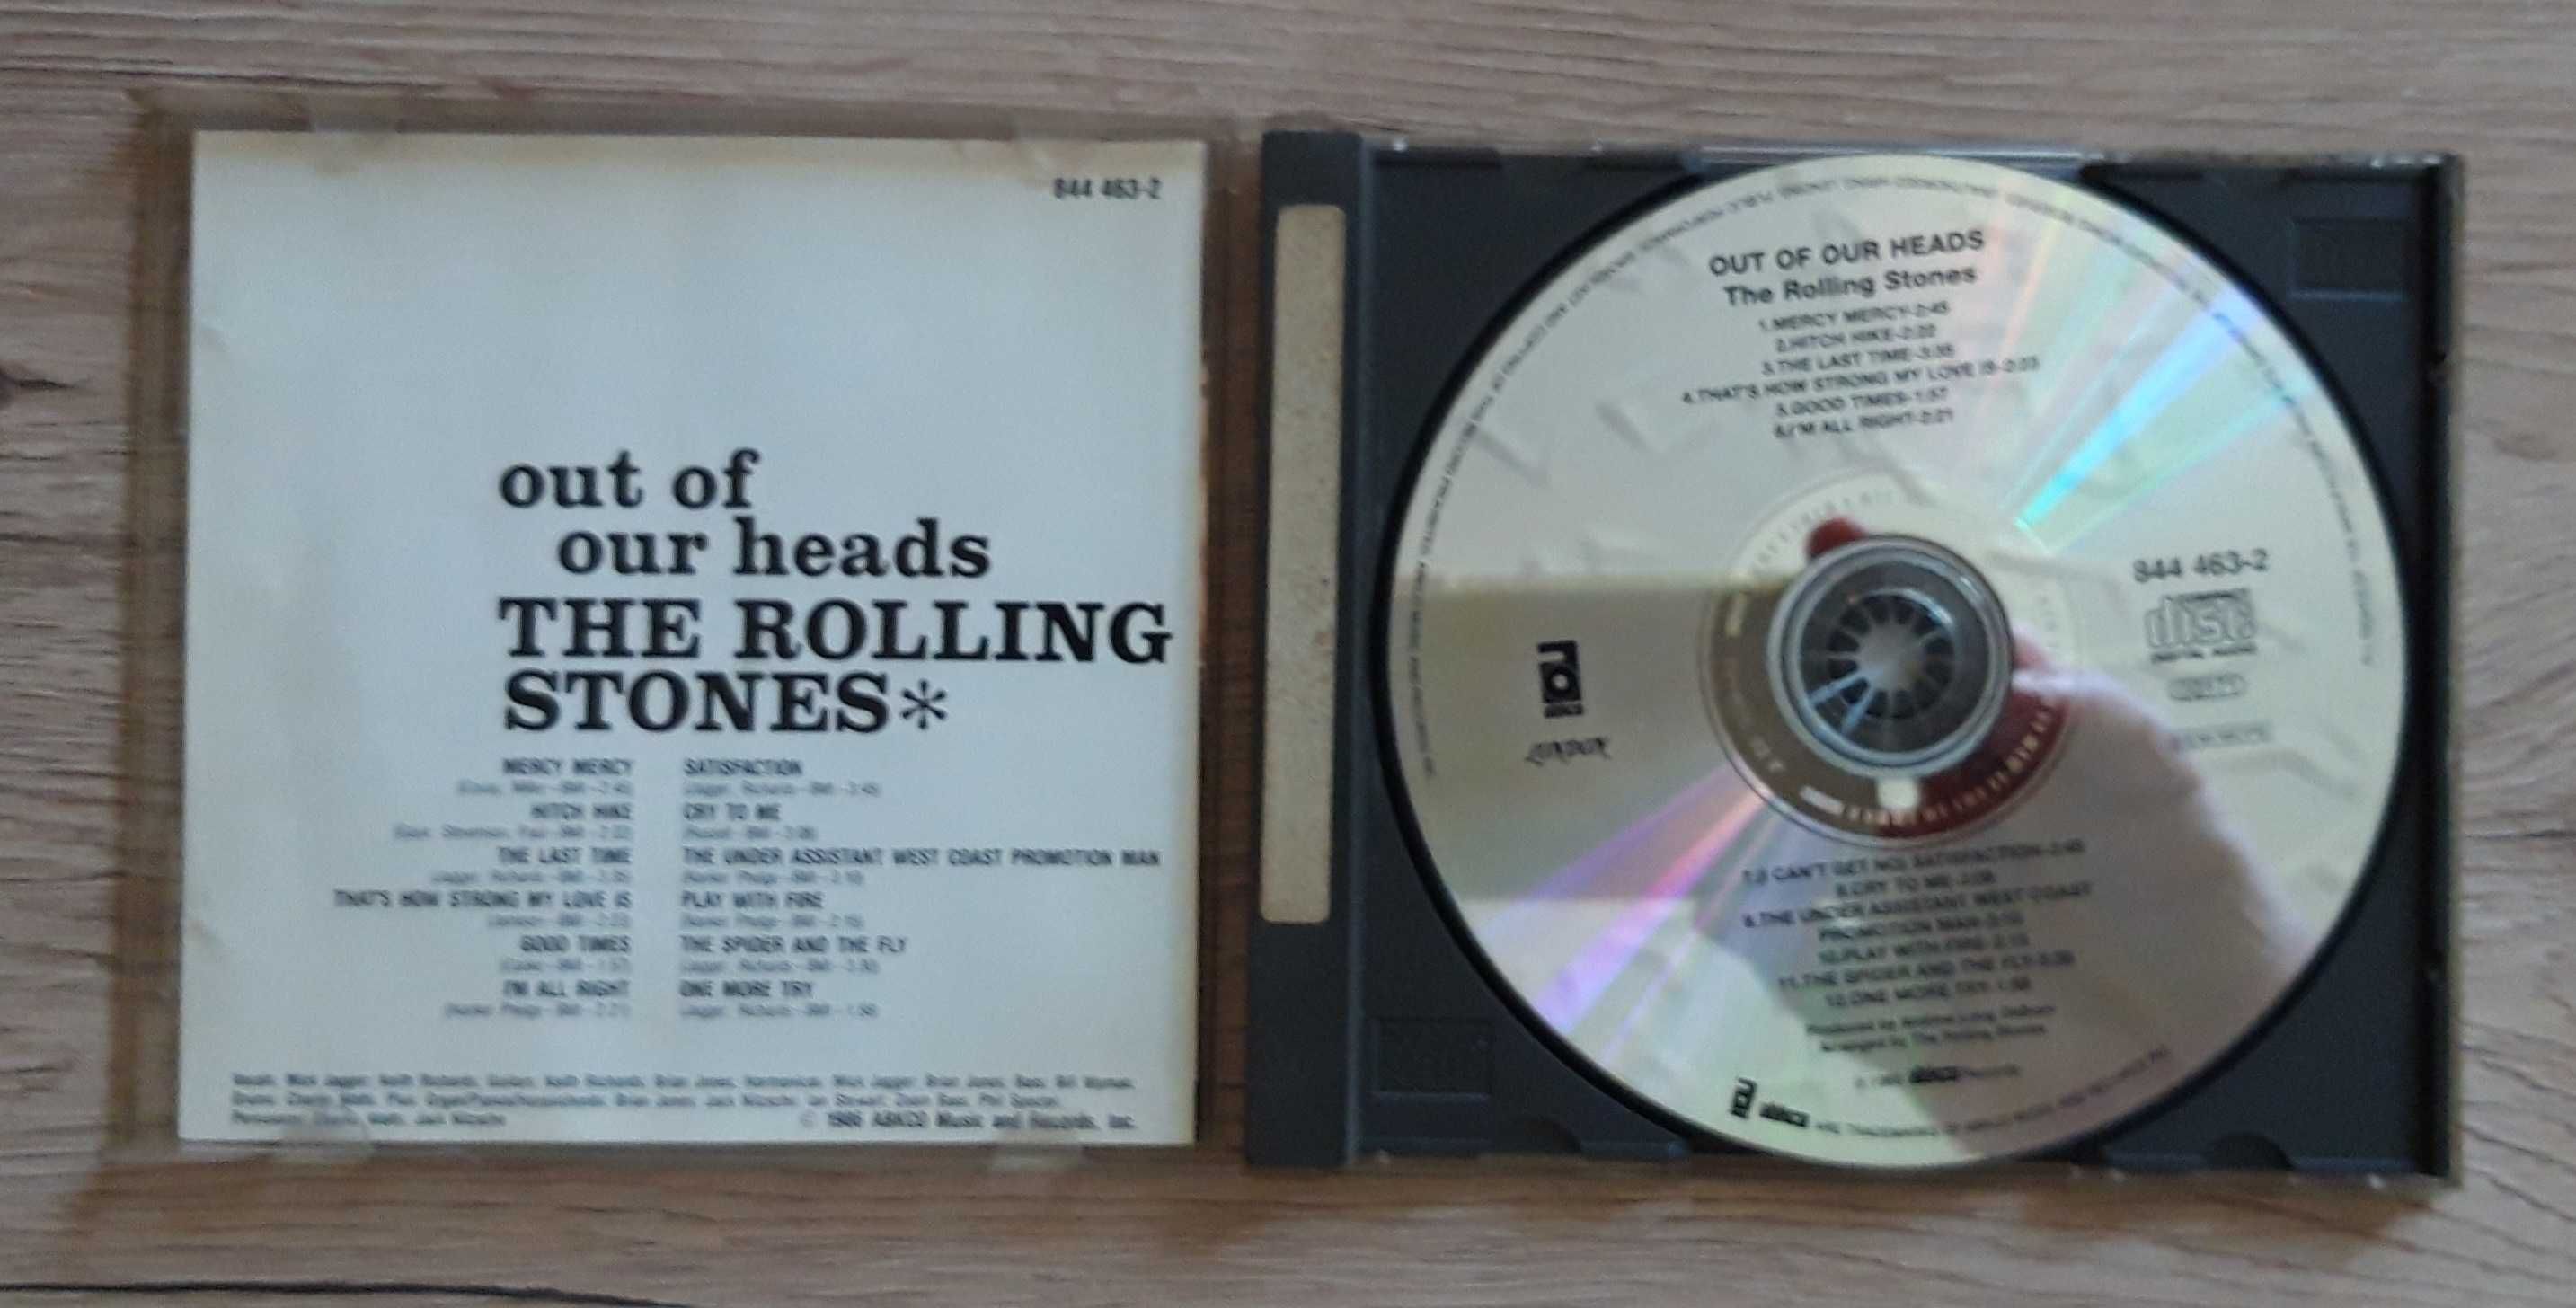 The Rolling Stones "Out of our heads". Płyta CD, wyd. angielskie 1986